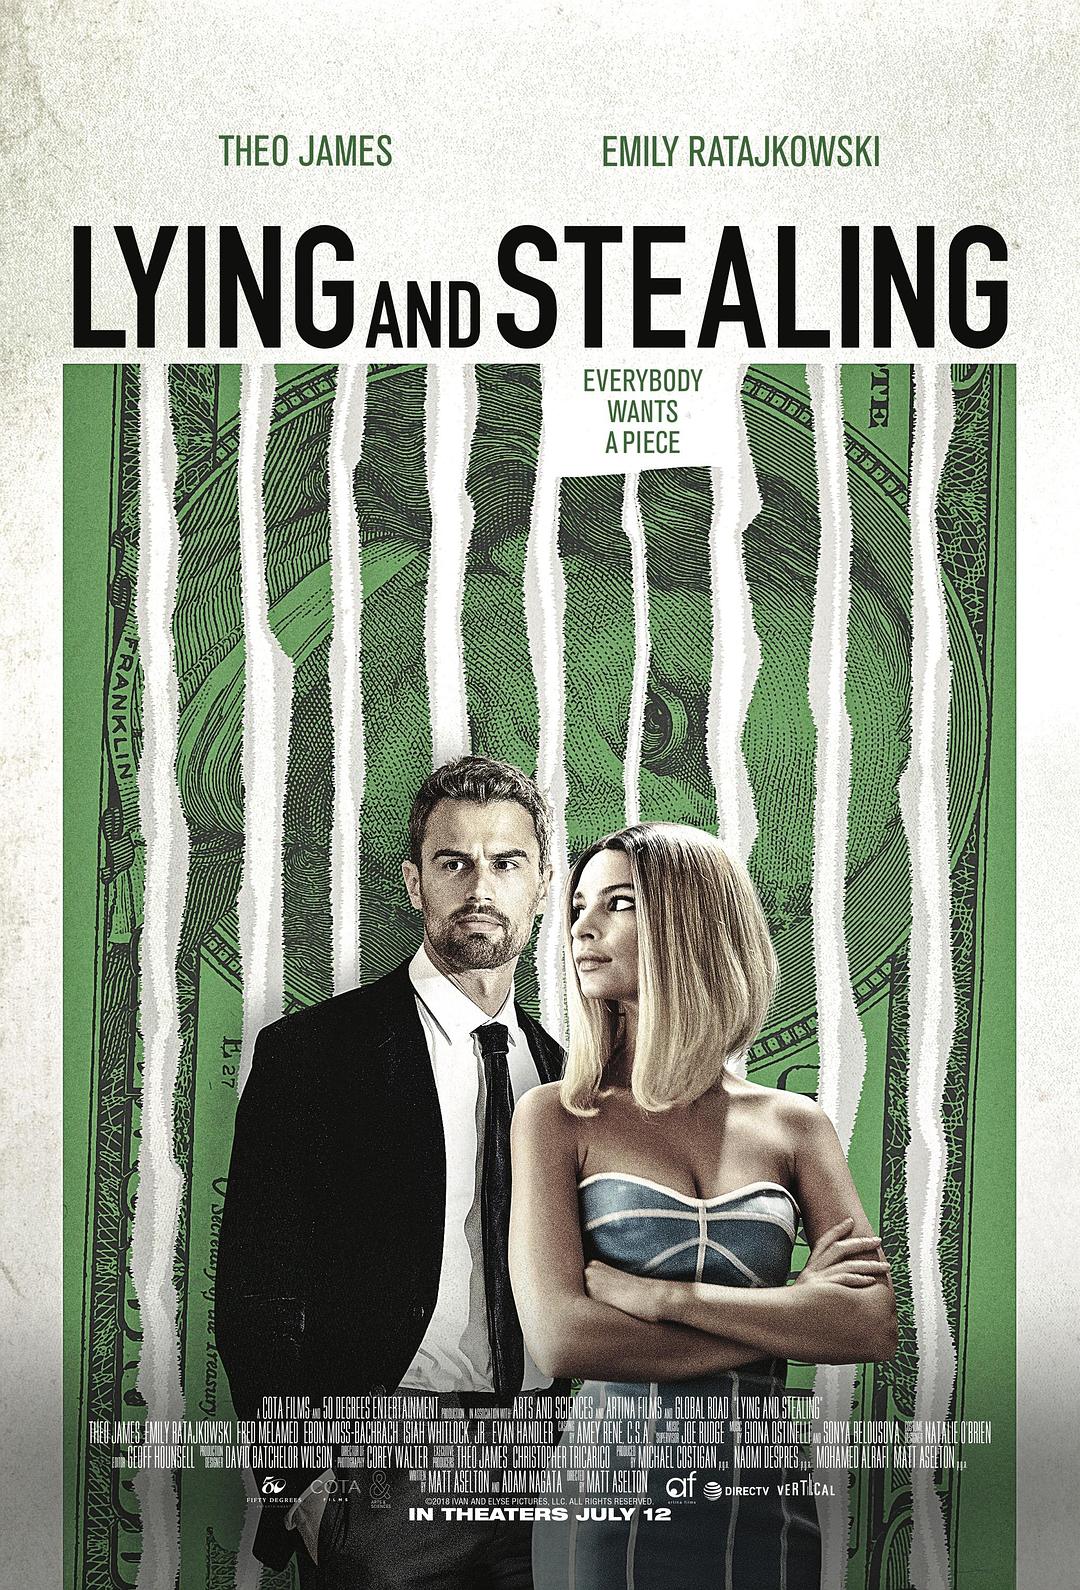 ͵/Estafadores Lying.and.Stealing.2019.1080p.BluRay.x264-PSYCHD 6.57GB-1.png